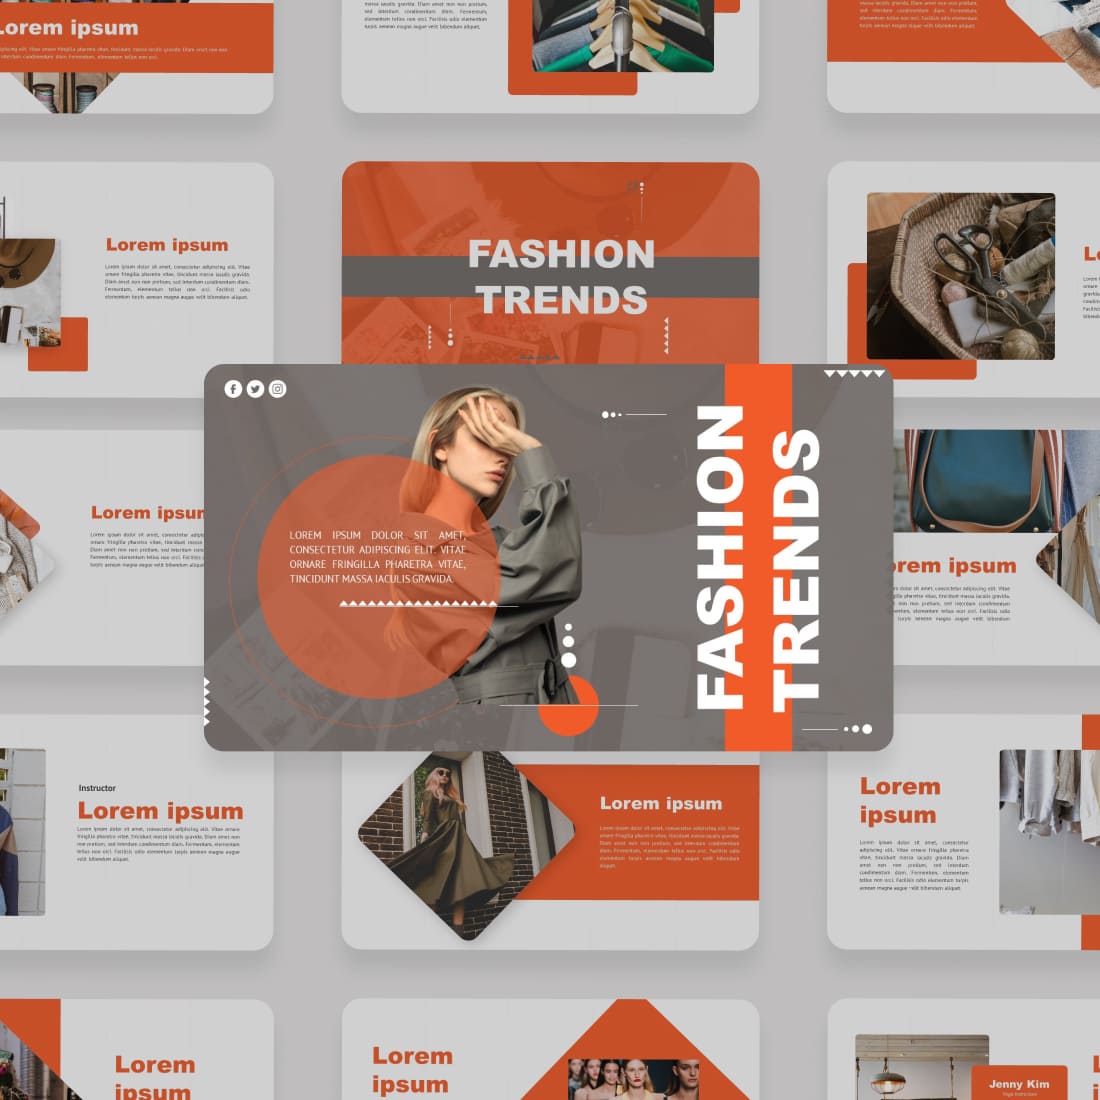 Fashion Trends Powerpoint Template cover.